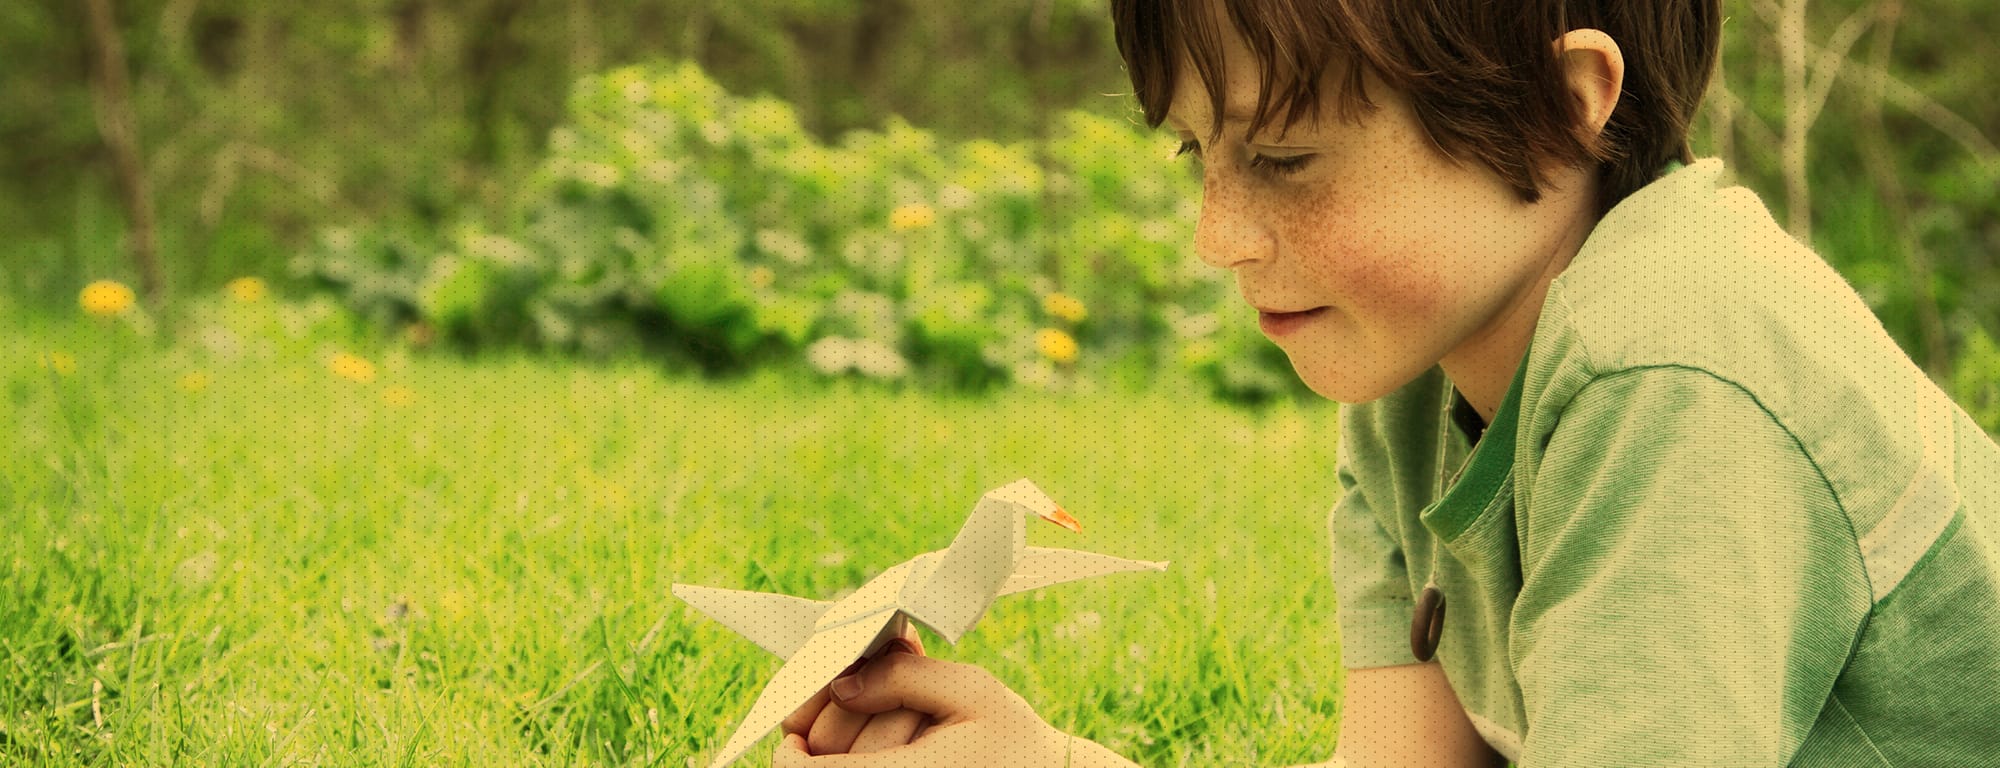 Little boy laying in grass, smiling and holding an origami bird made of paper